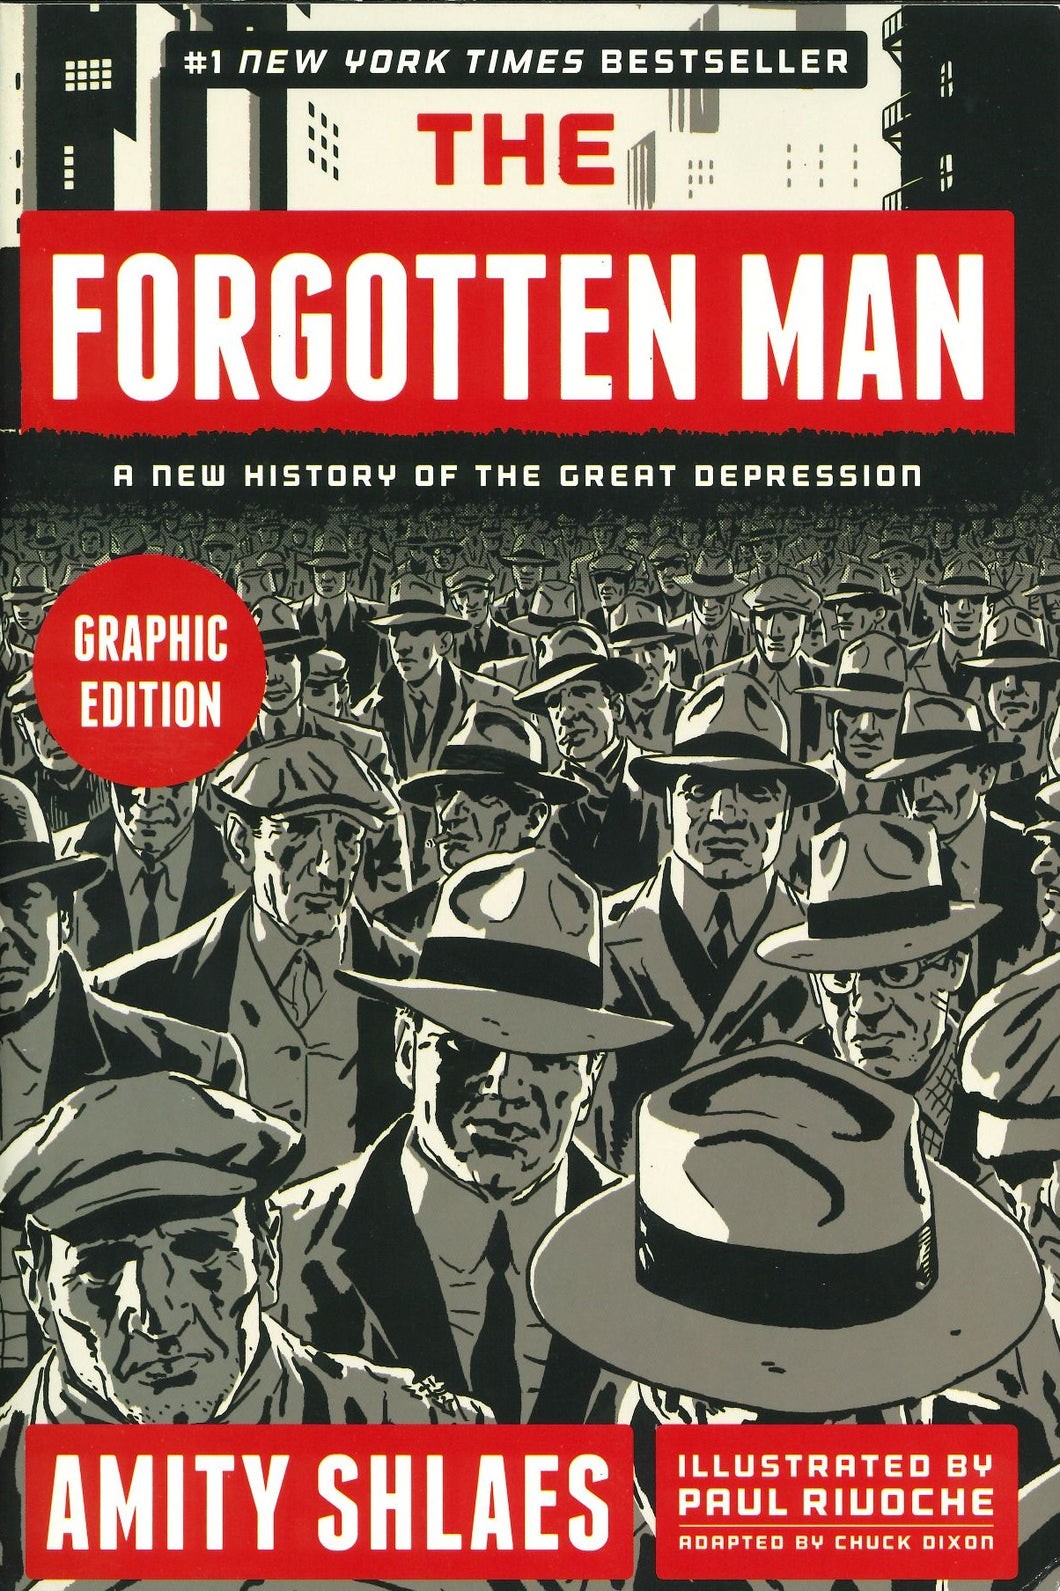 The Forgotten Man Graphic Edition: A New History of the Great Depression